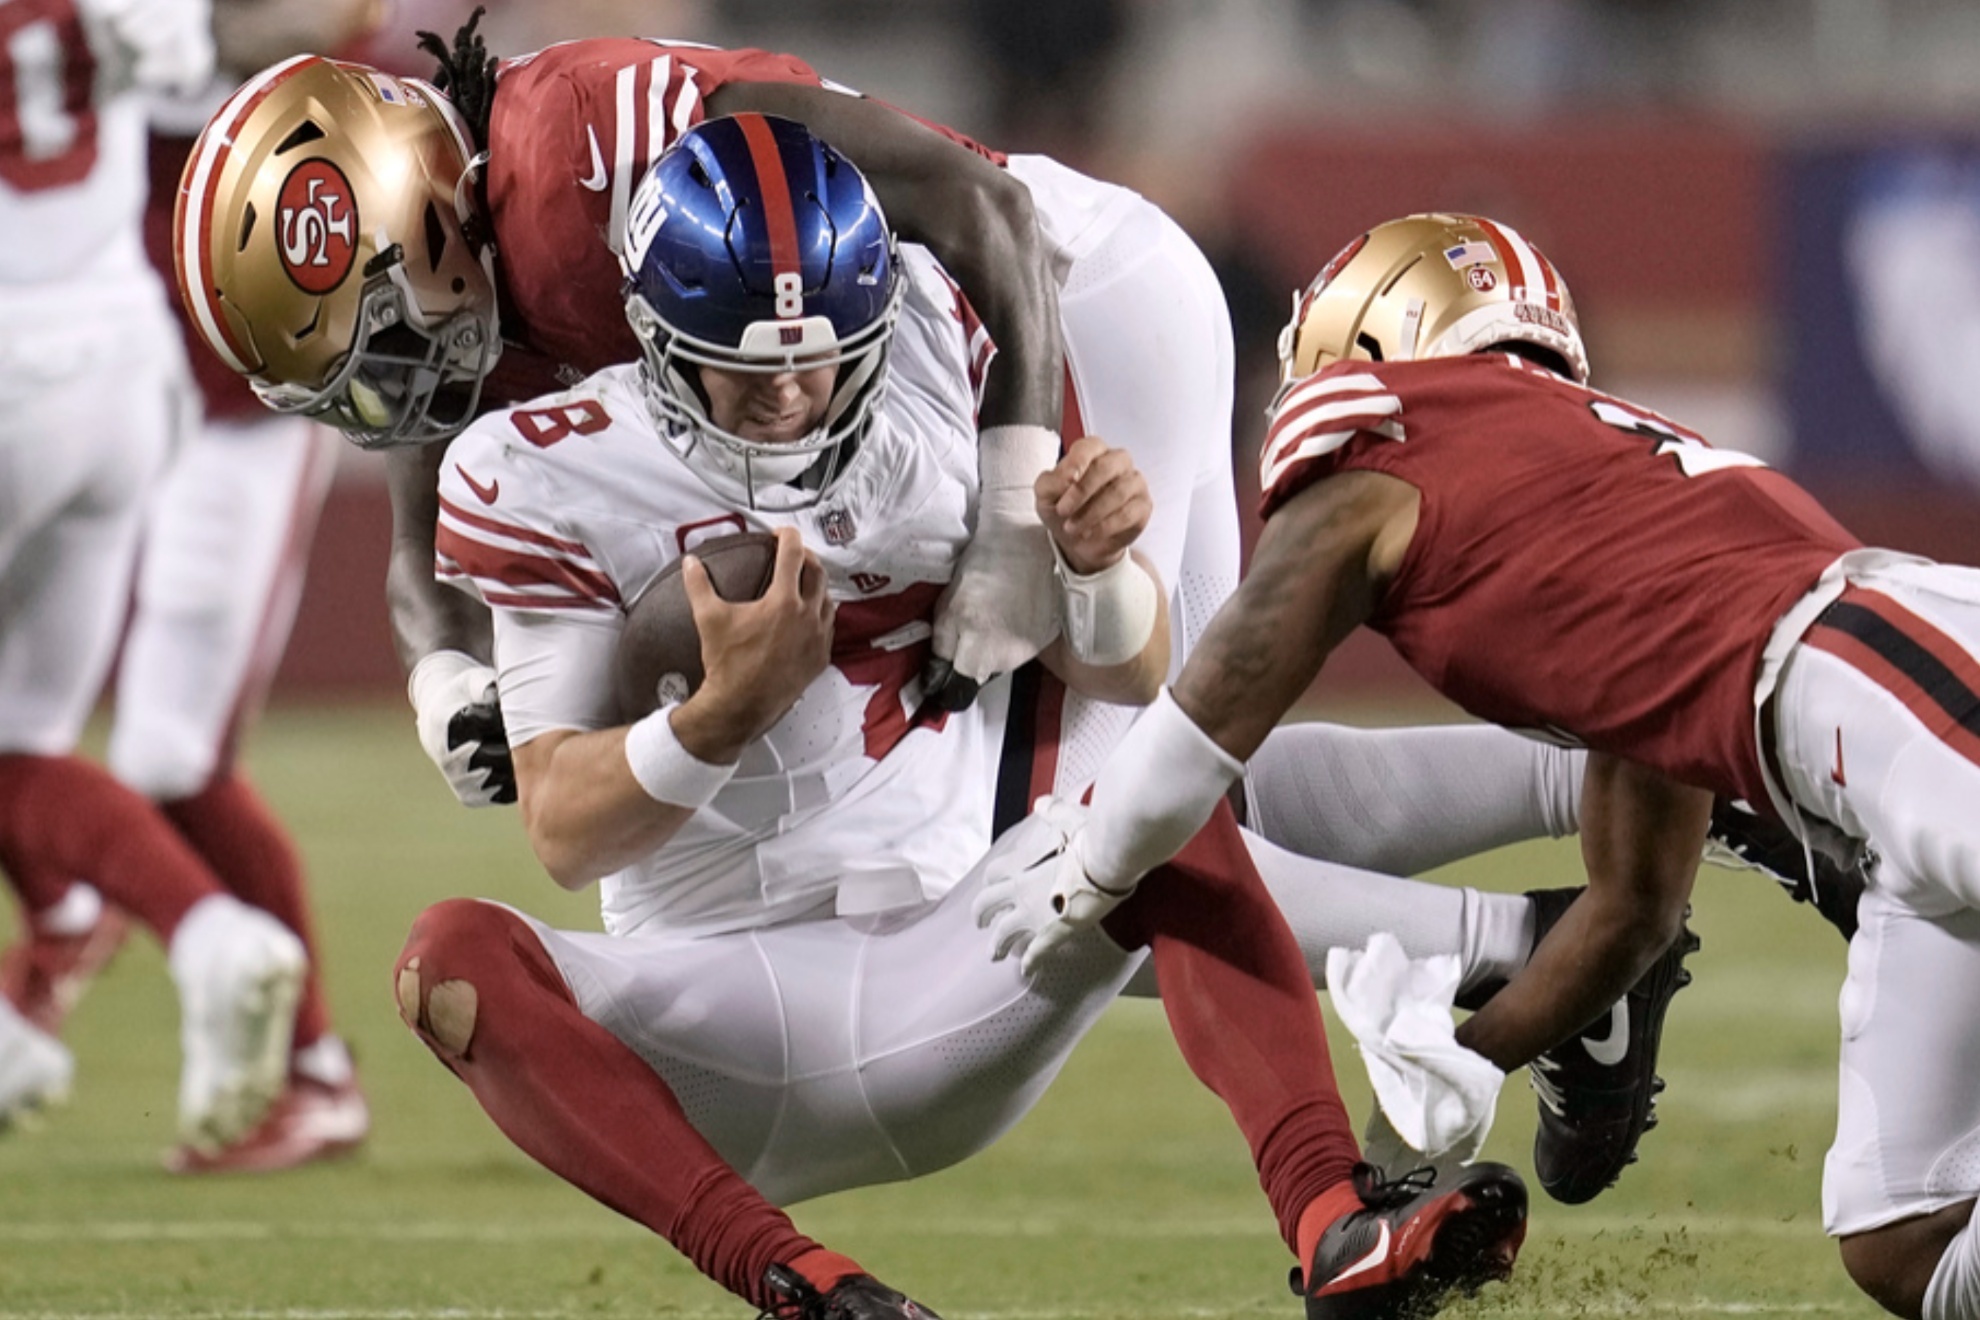 The Giants lost their second game of the season on Thursday Night against the San Francisco 49ers